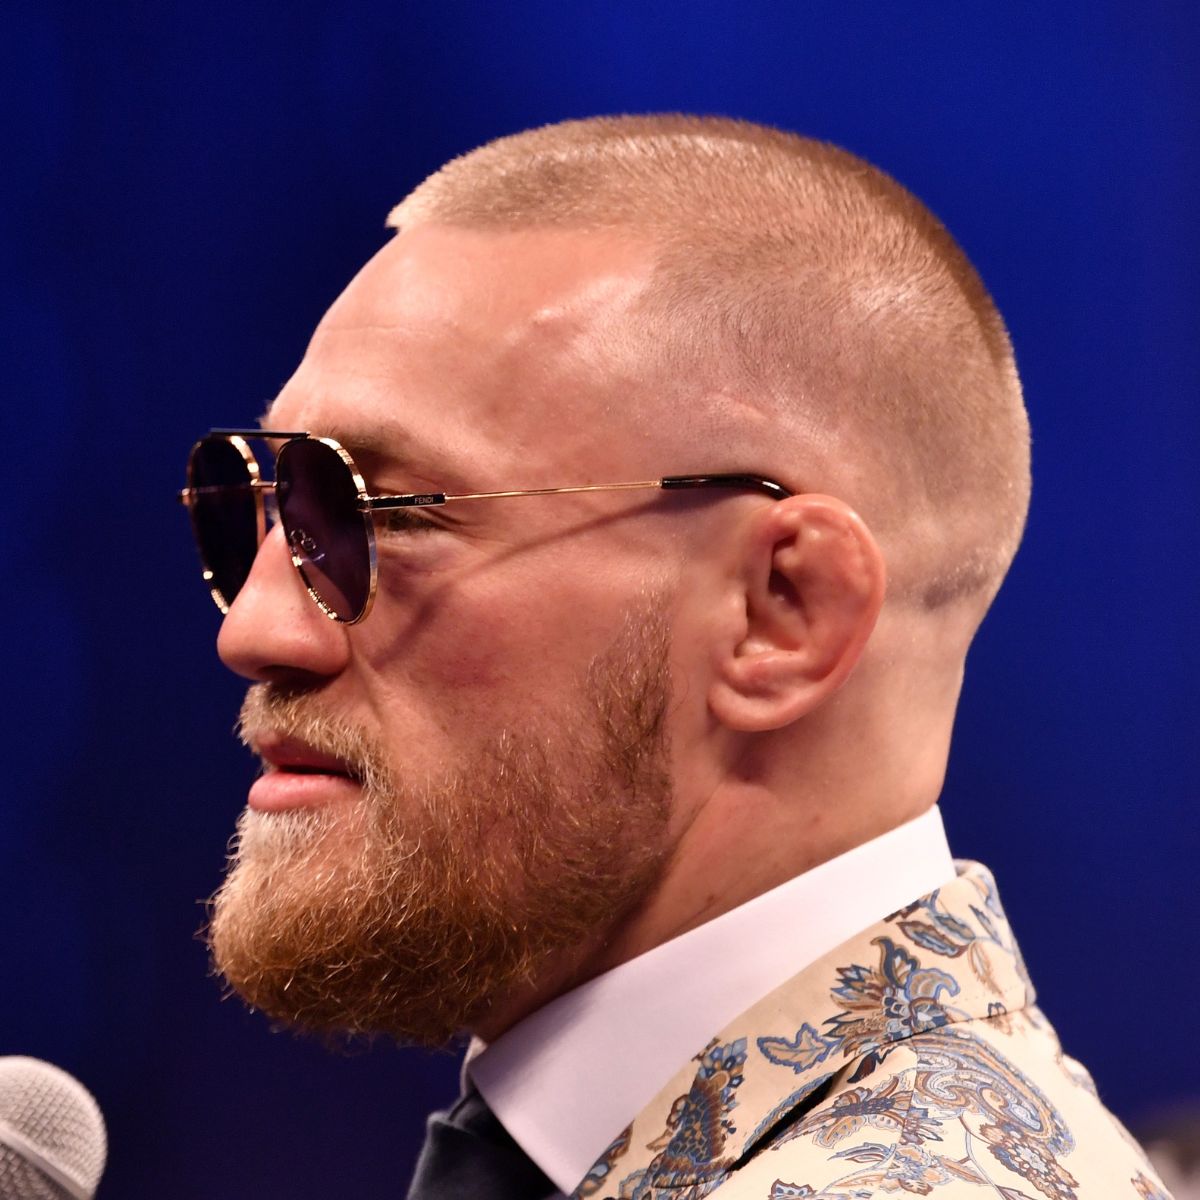 conor-mcgregor-7-buzz-cut-hairstyles-to-try-in-2020-man-for-himself-ft.jpg